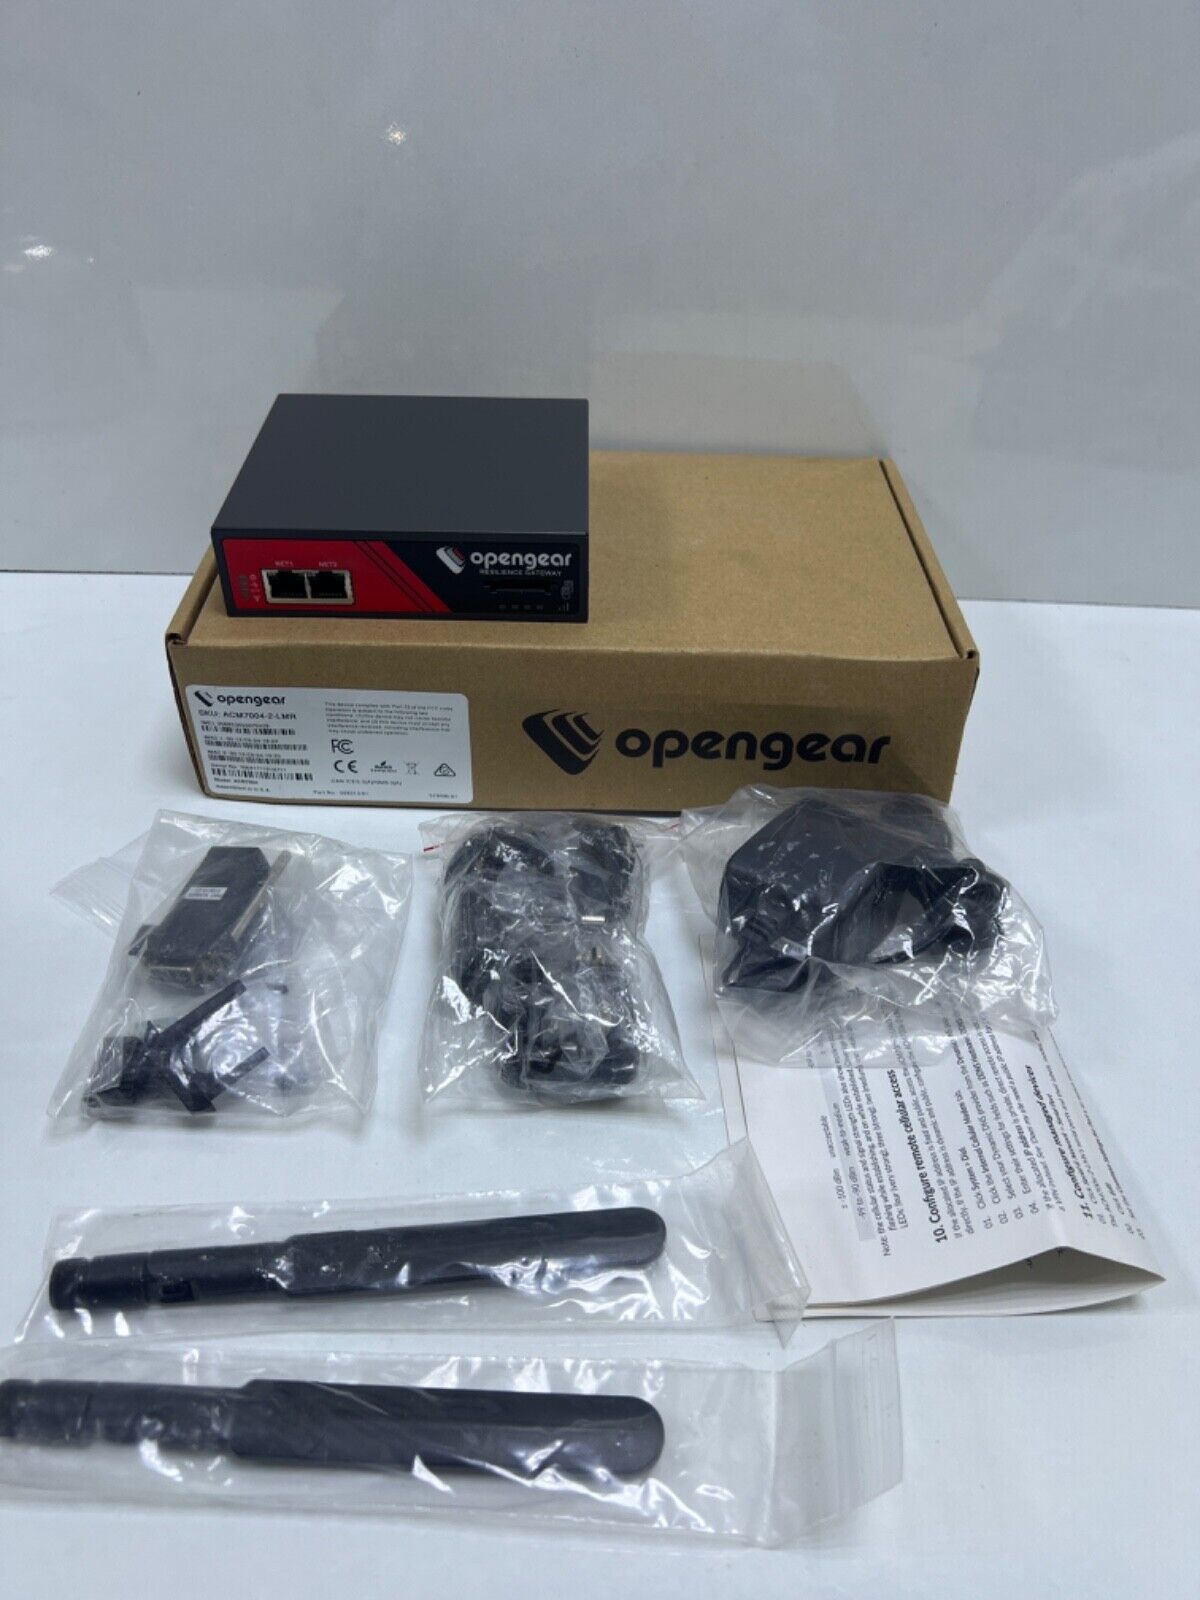 Opengear Resilience Gateway ACM7004-2-LMR Remote Network Controller